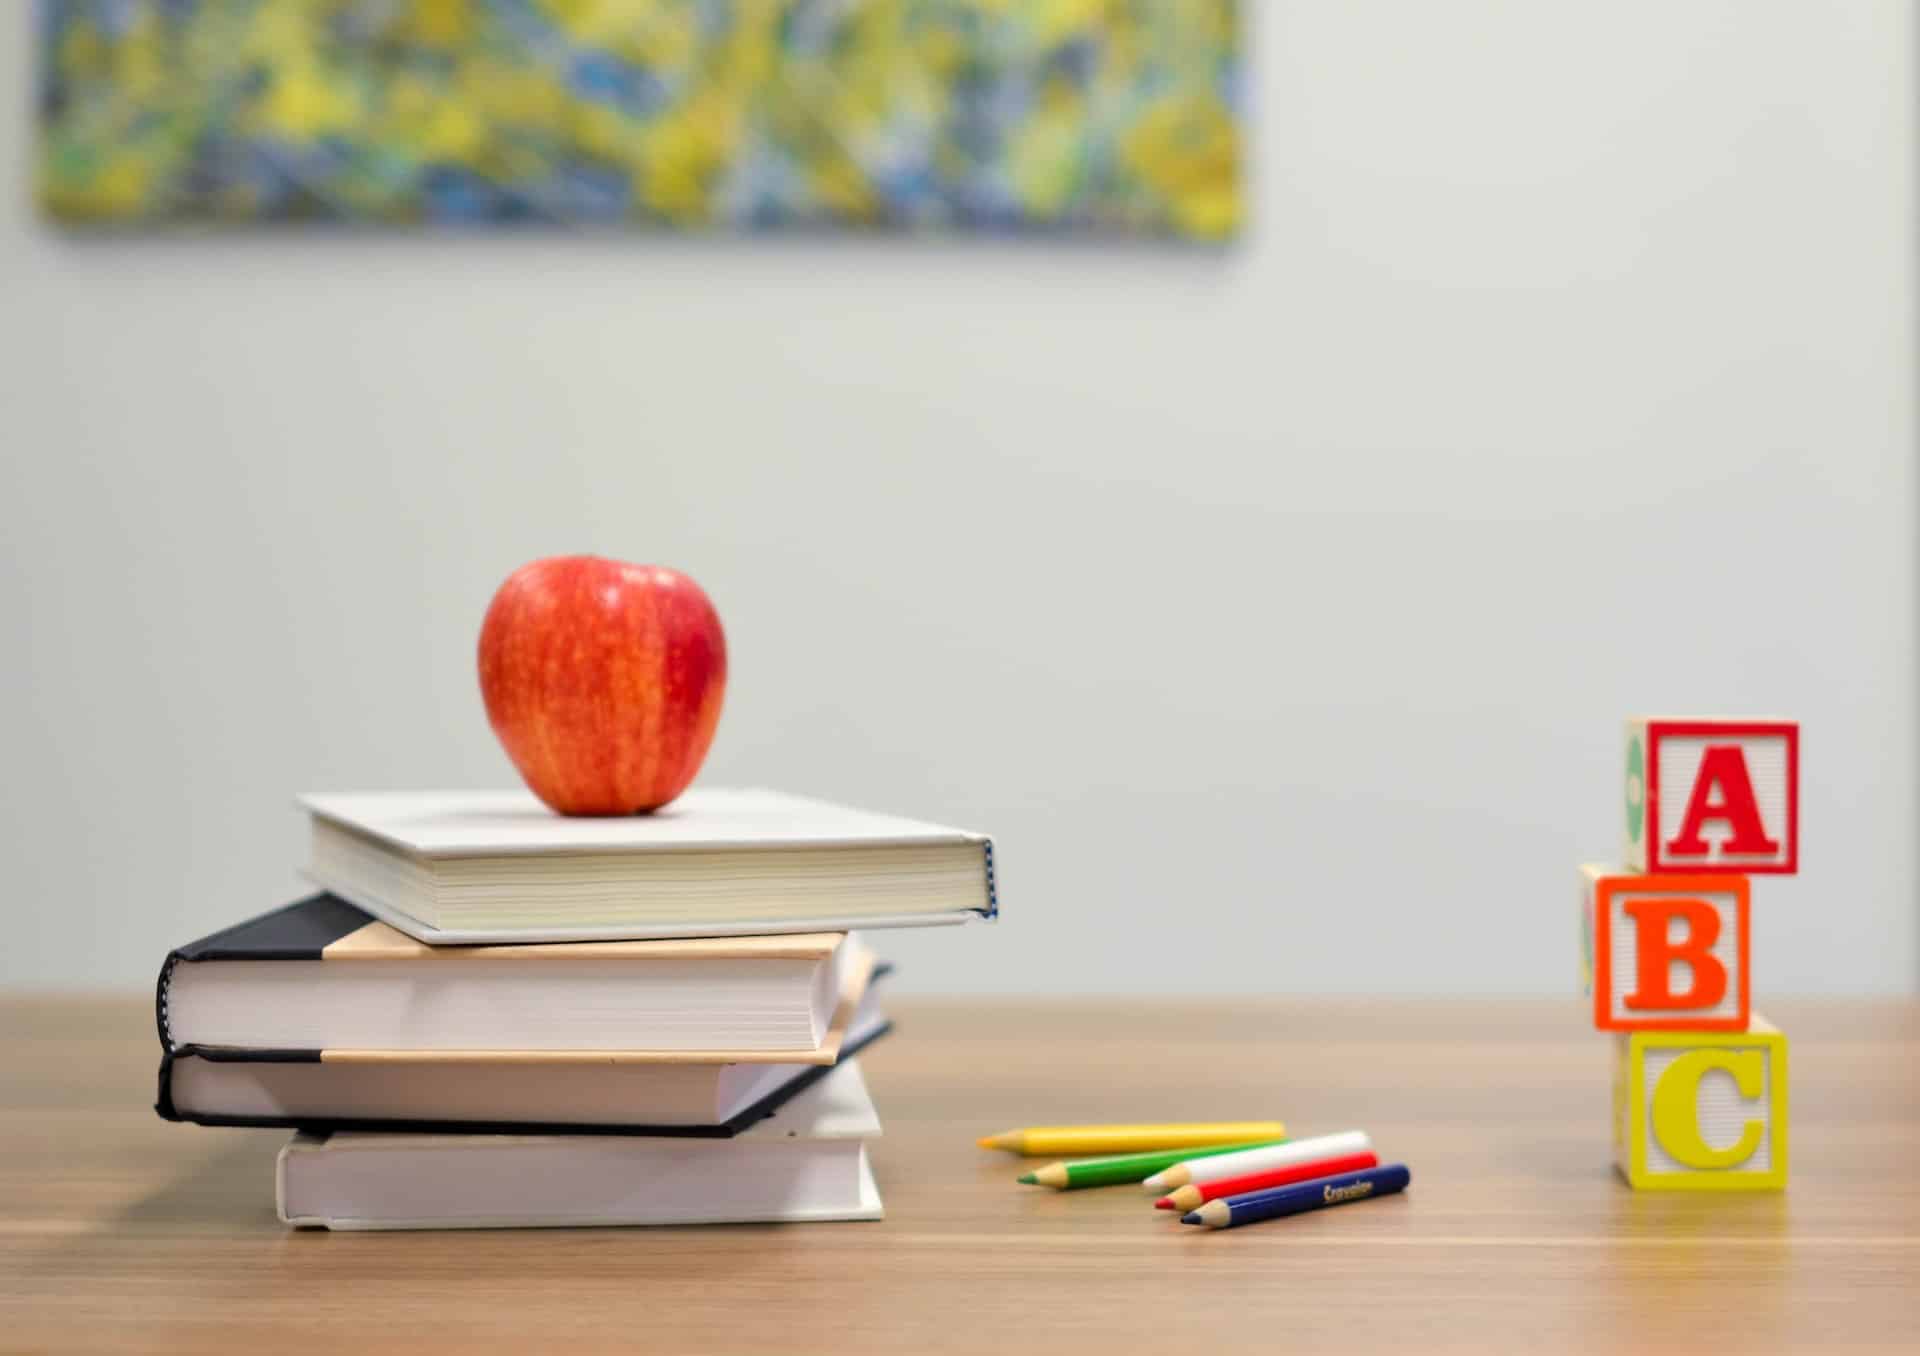 photo of teachers desk with apple and books representing discrimination based on family status